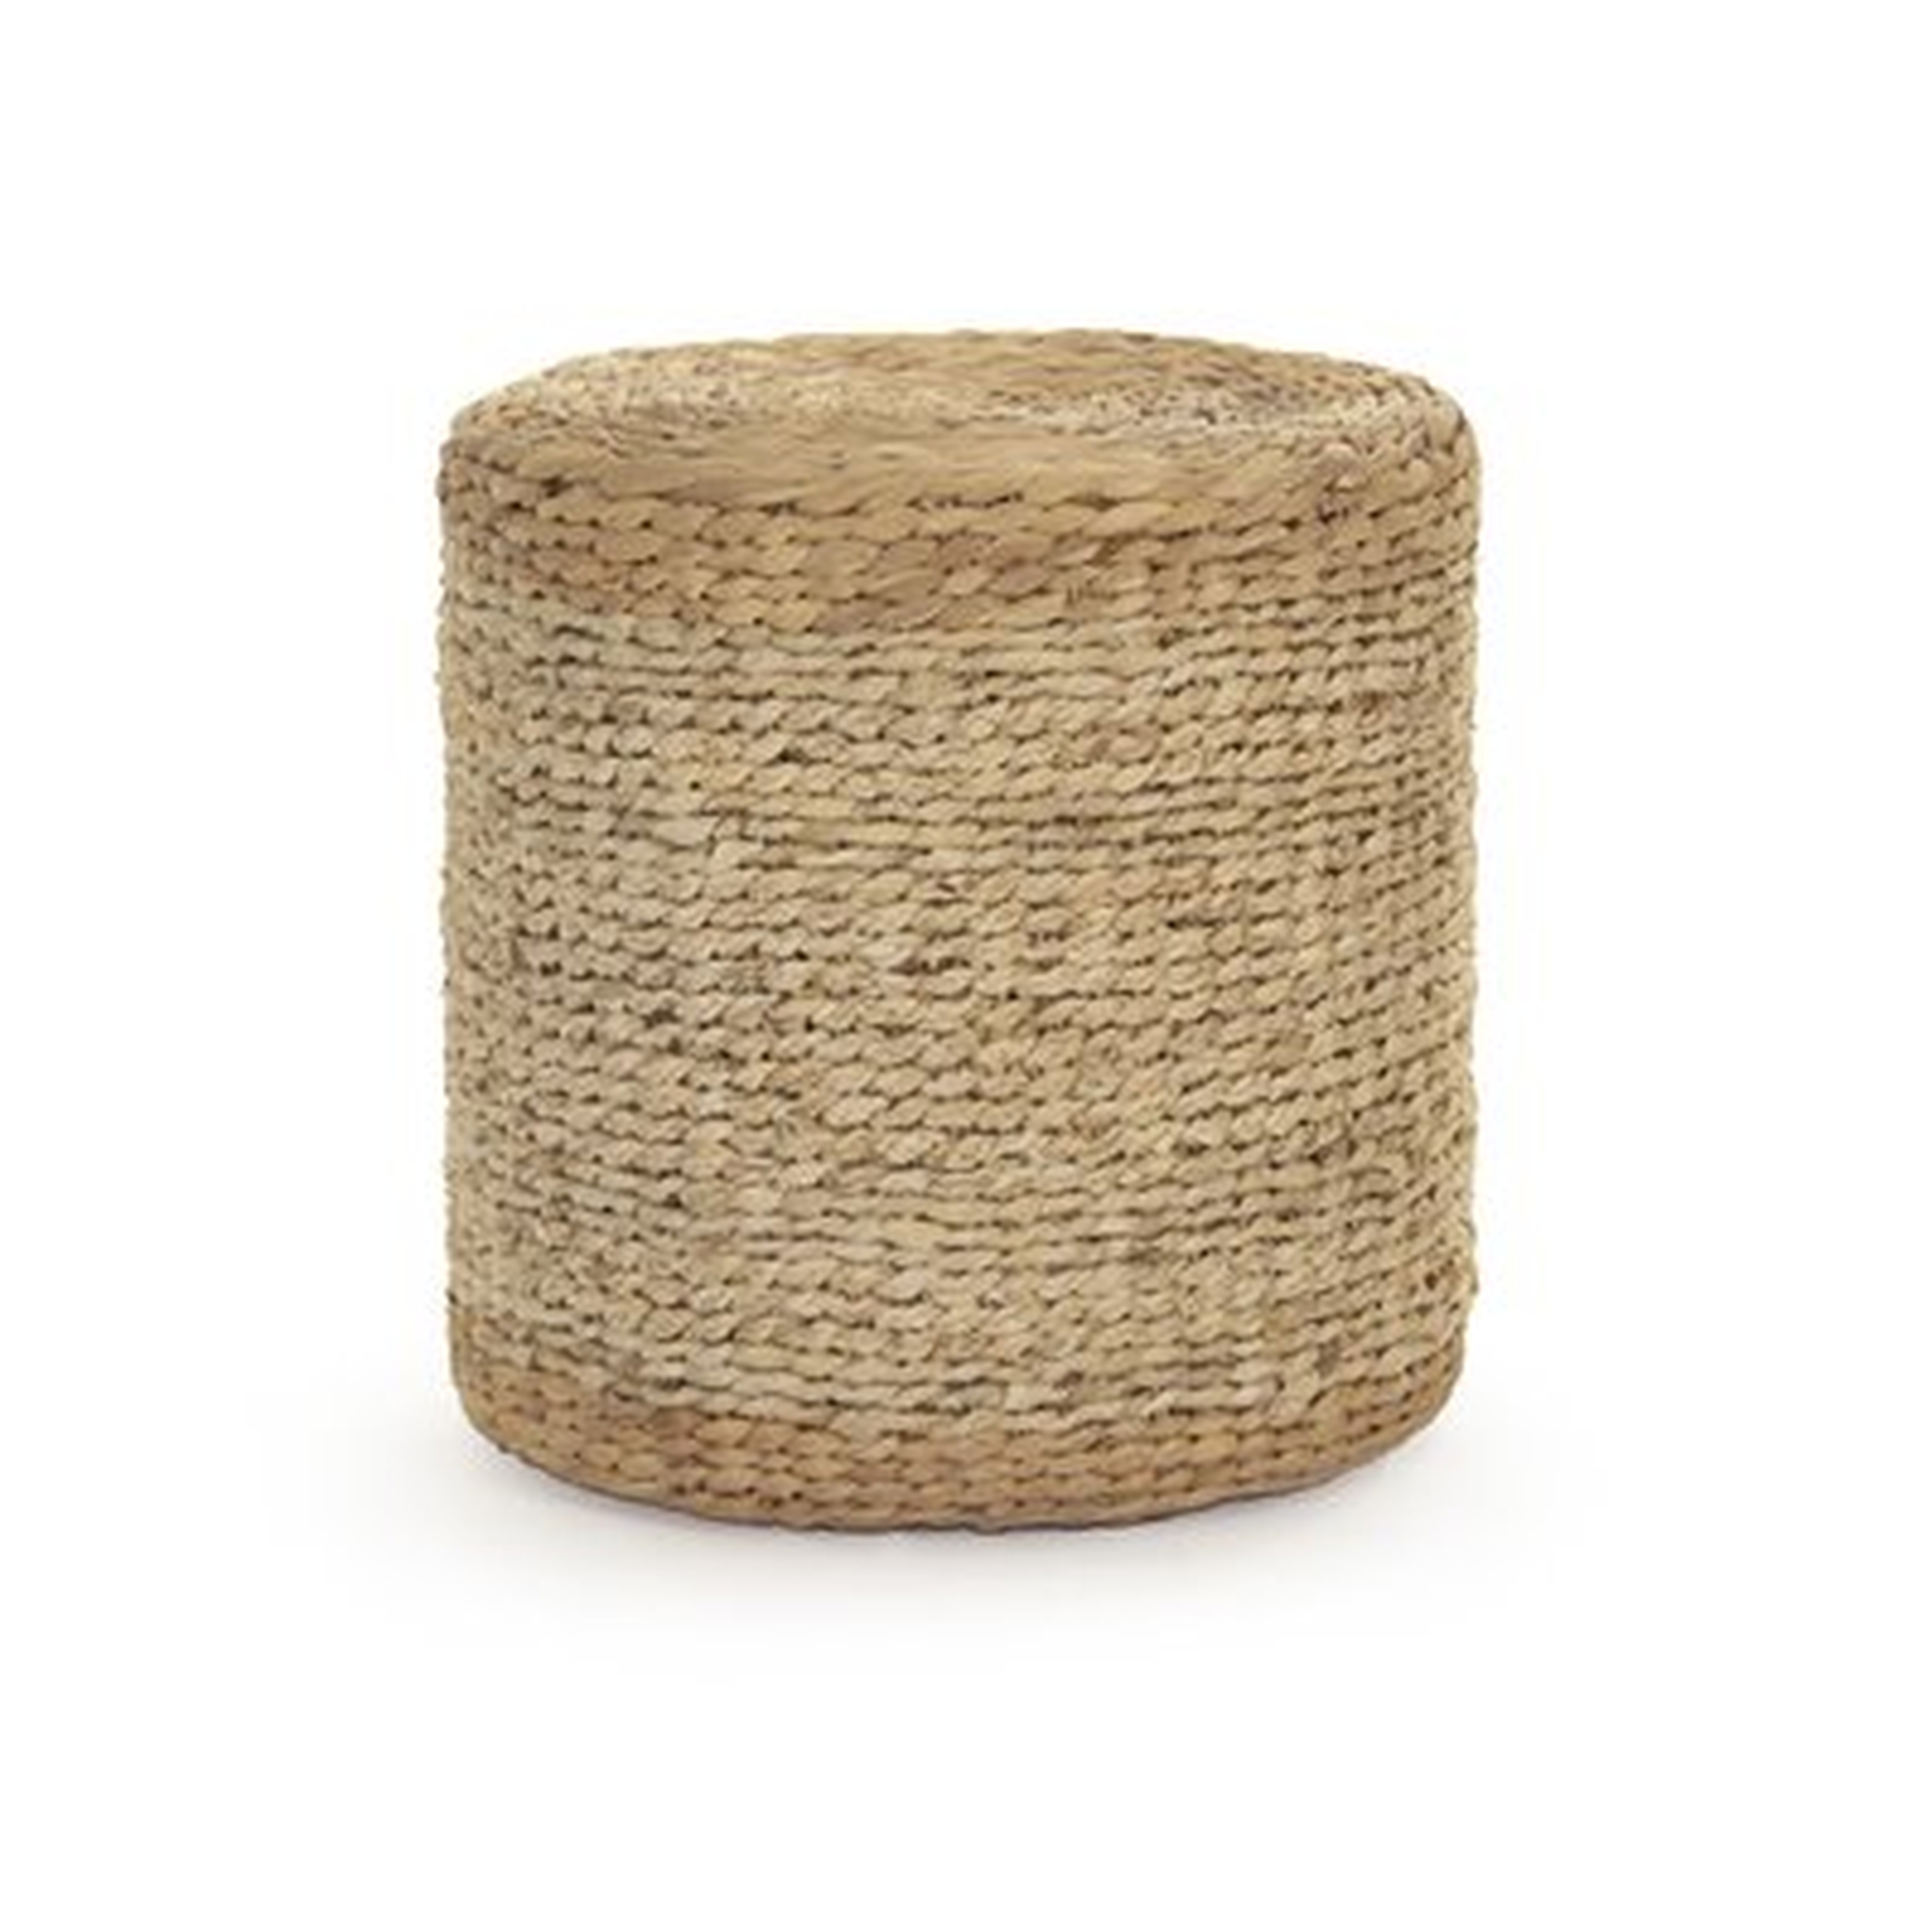 Ahlers Woven Cylinder Accent Stool - Wayfair